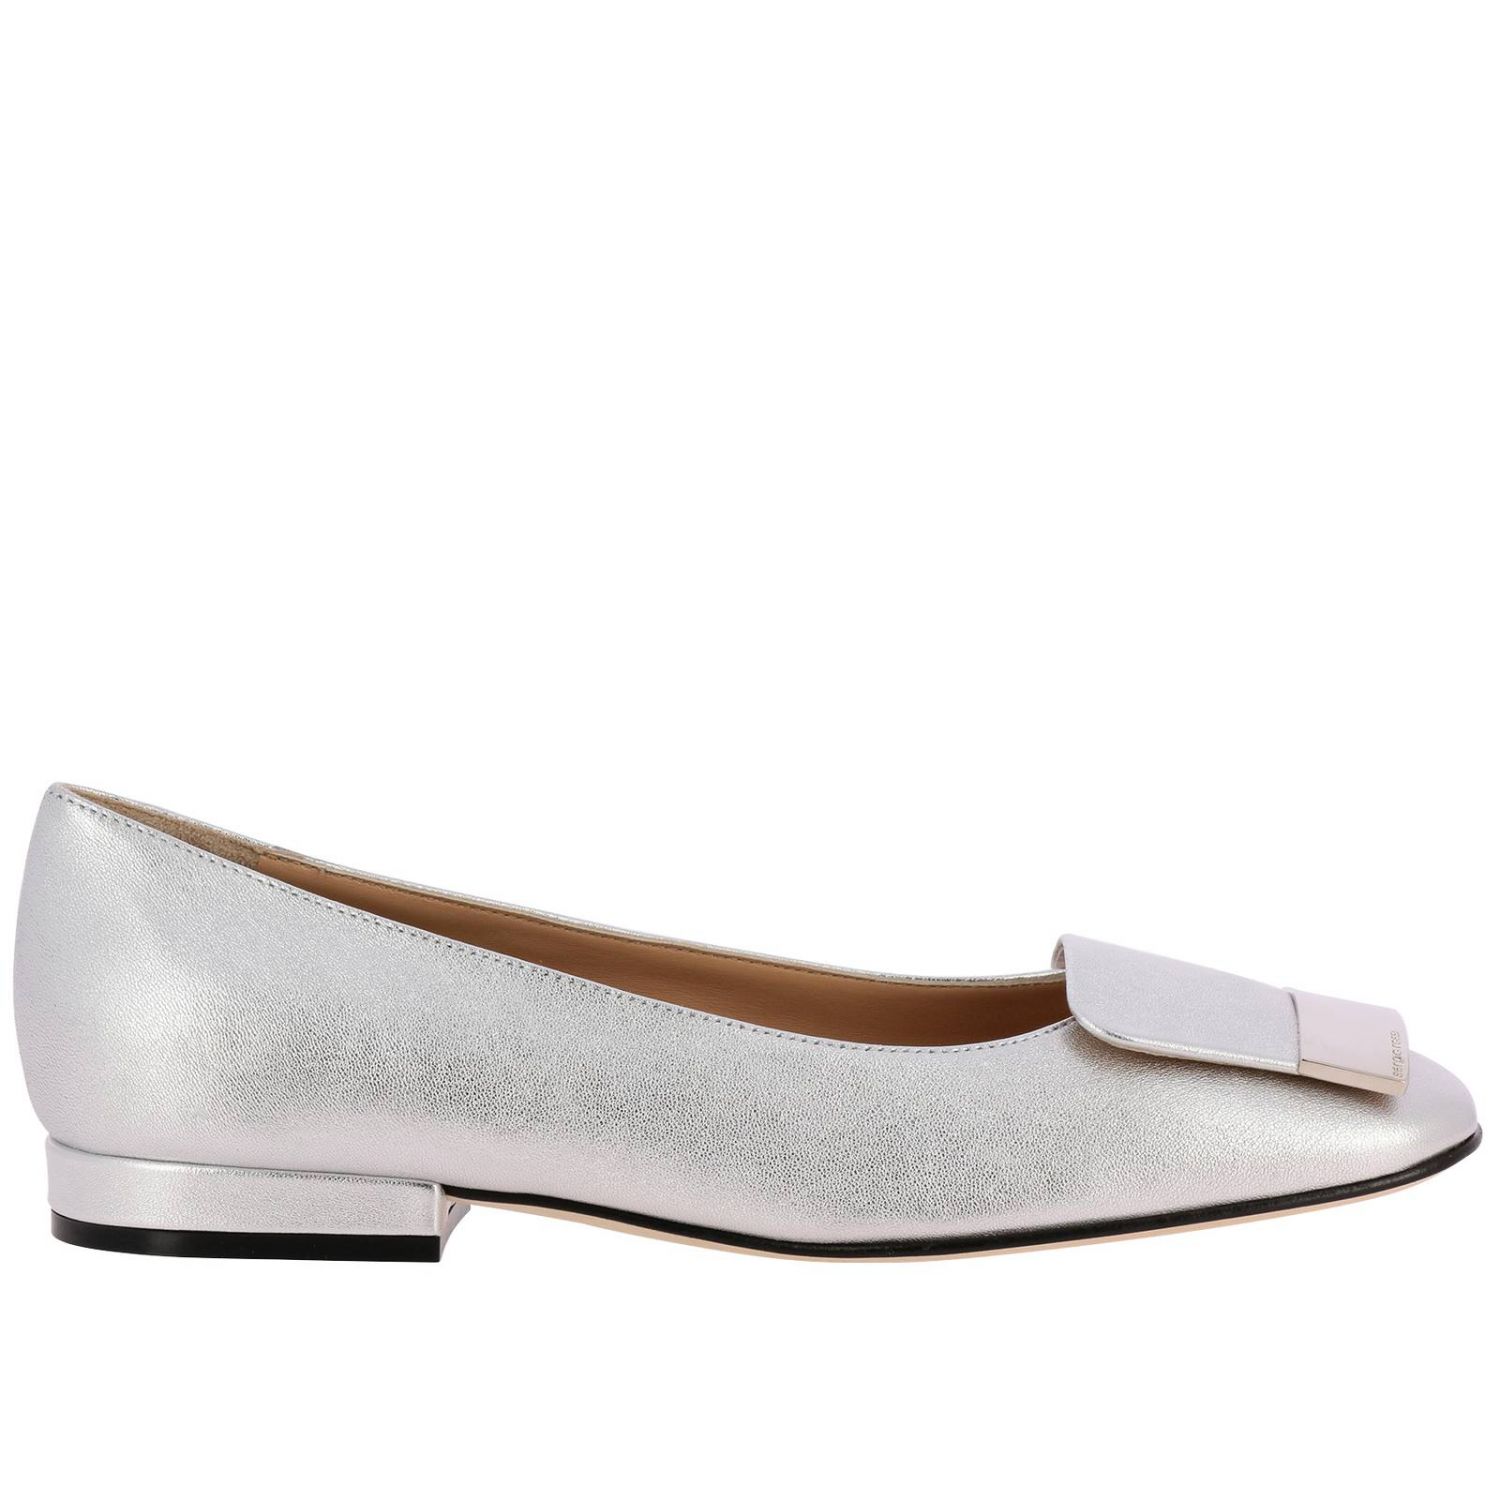 Sergio Rossi Outlet: Shoes women | Ballet Flats Sergio Rossi Women ...